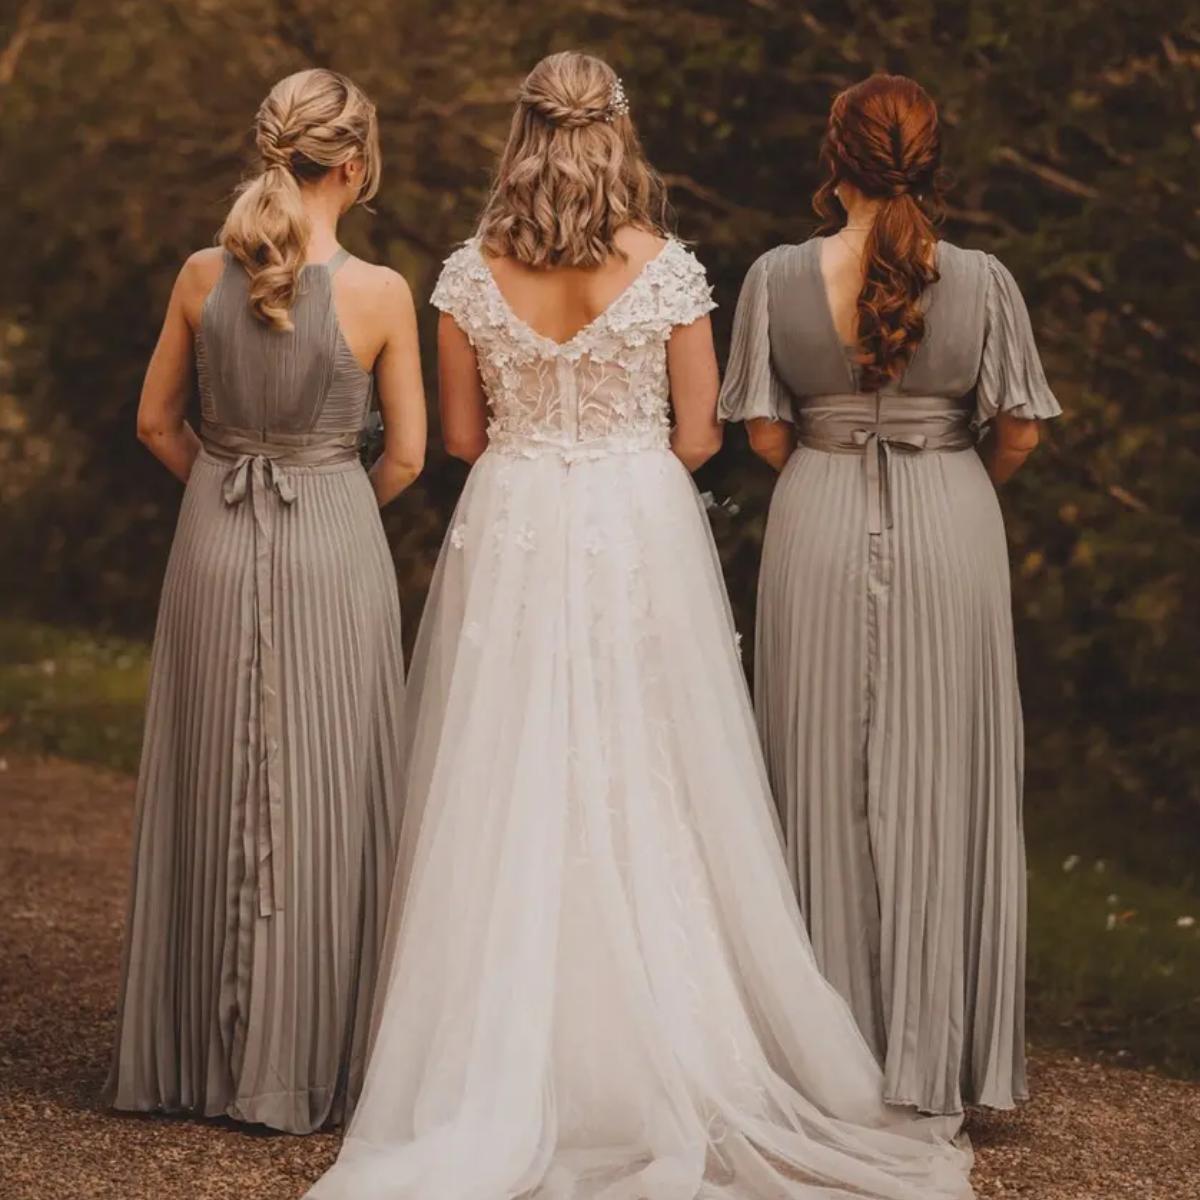 The Best Hairstyles According to Your Wedding Dress Neckline